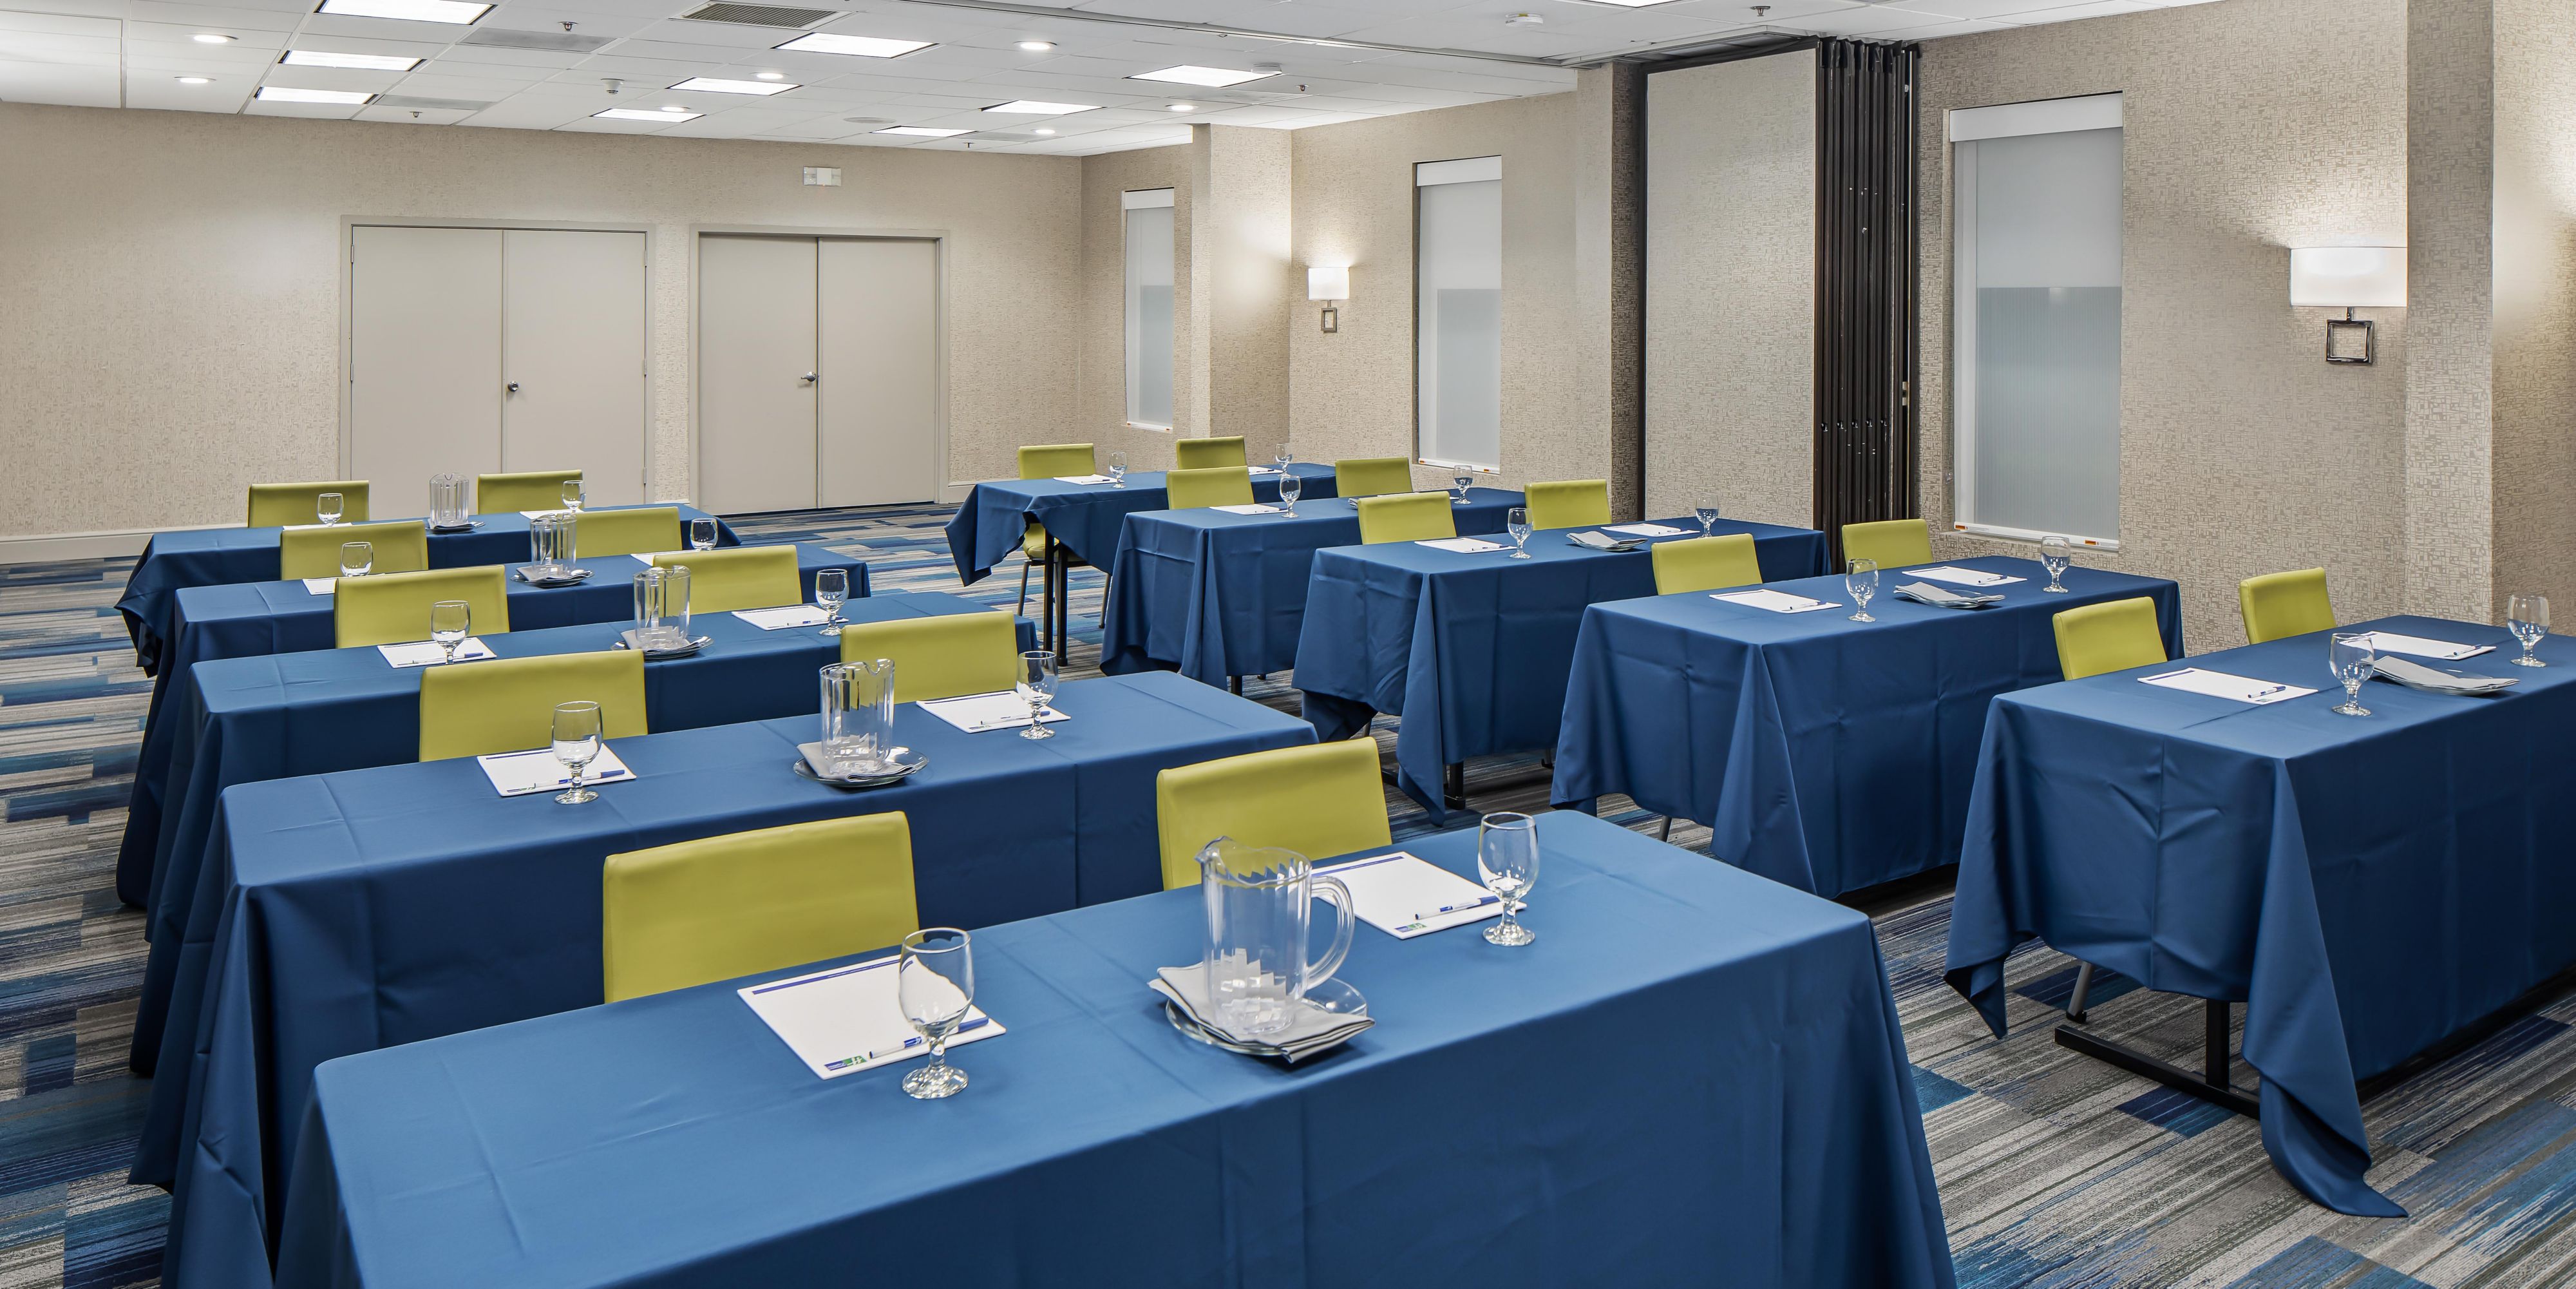 Our Peachtree Ballroom is perfect for your next meeting, training, or social event. Our commitment to the IHG Way of Clean, and the process of on-going cleaning, sanitization, and social distancing allows you and your attendees to feel safe.  Also, IHG requires masks in all public spaces.  Please call (404) 324-4182 to book your next event.